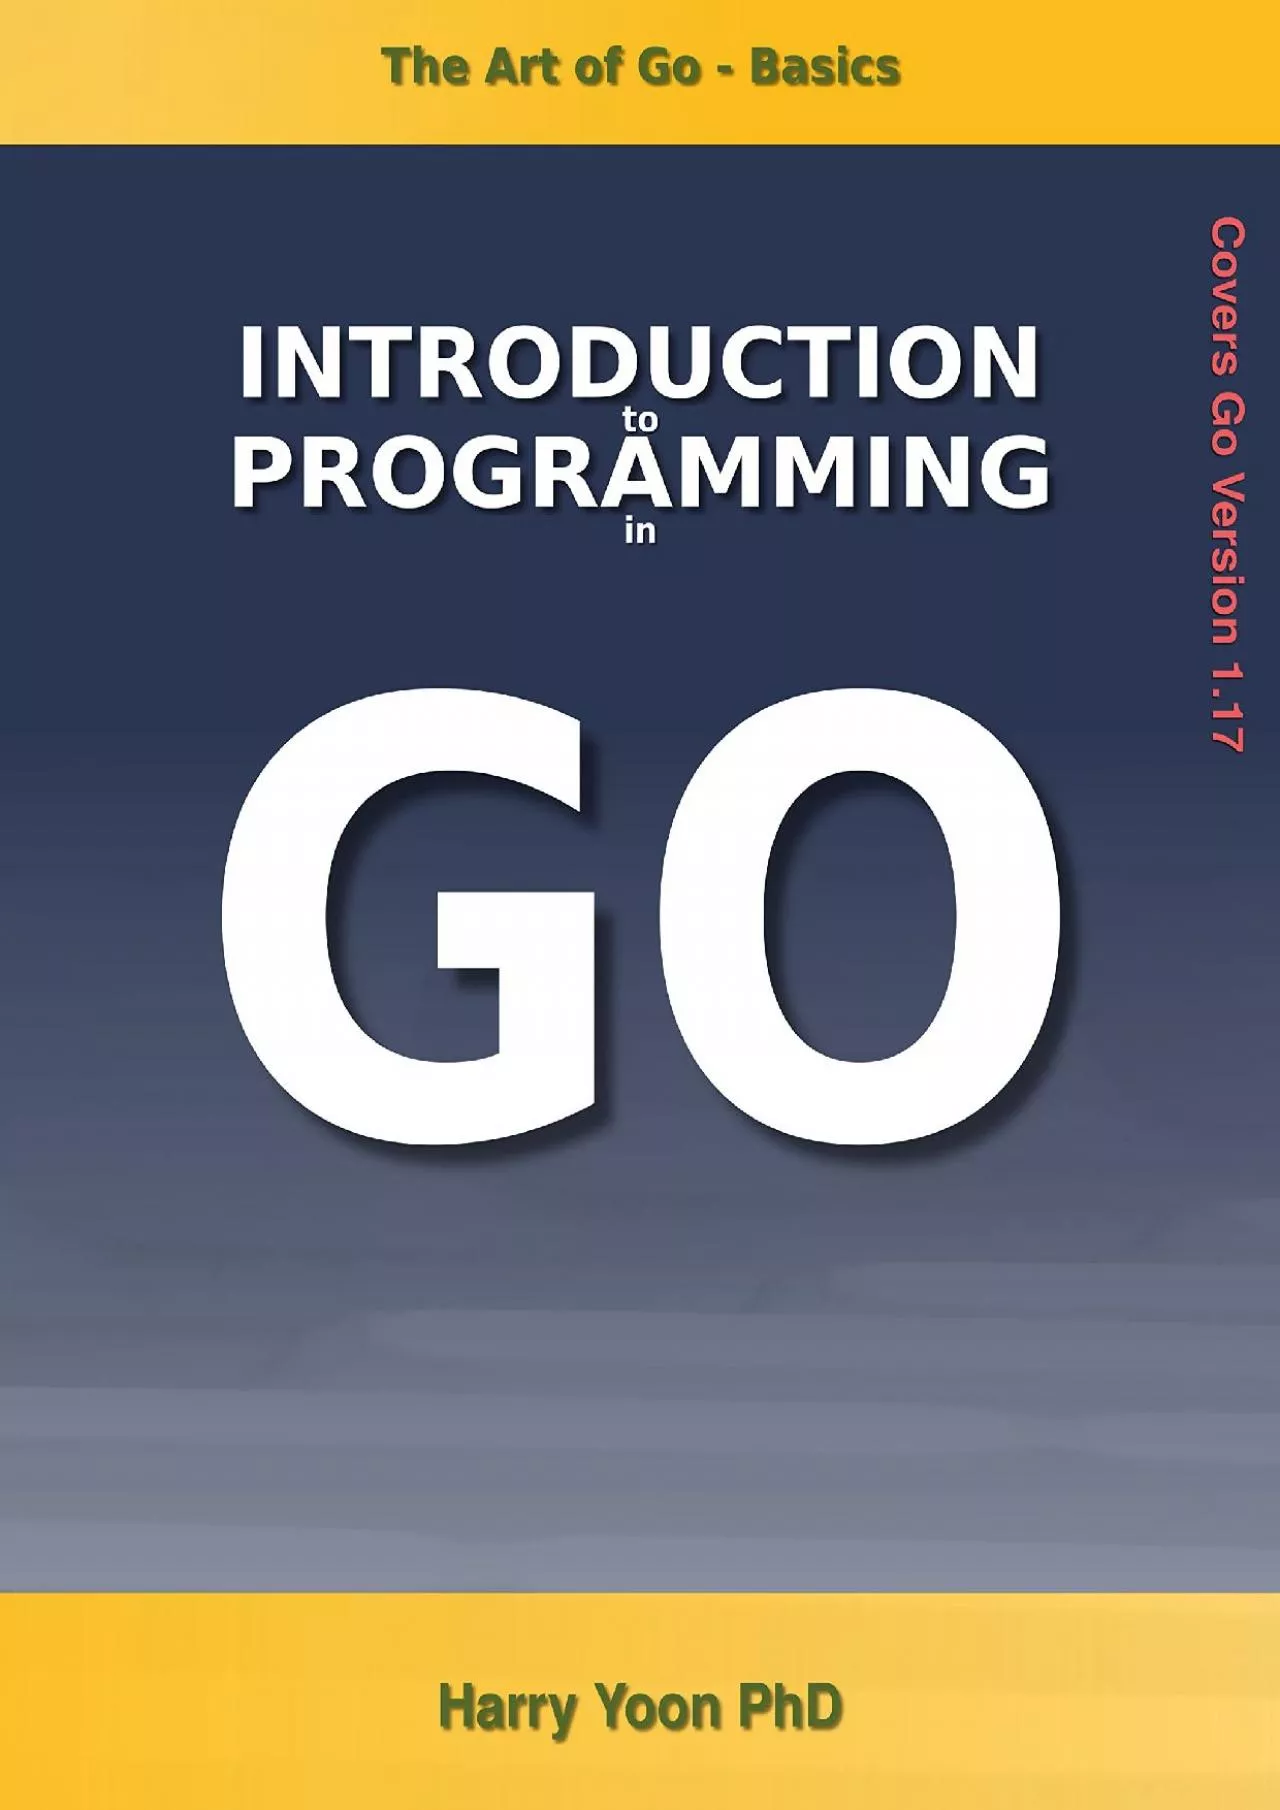 [DOWLOAD]-The Art of Go - Basics: Introduction to Programming in Golang - Beginner to